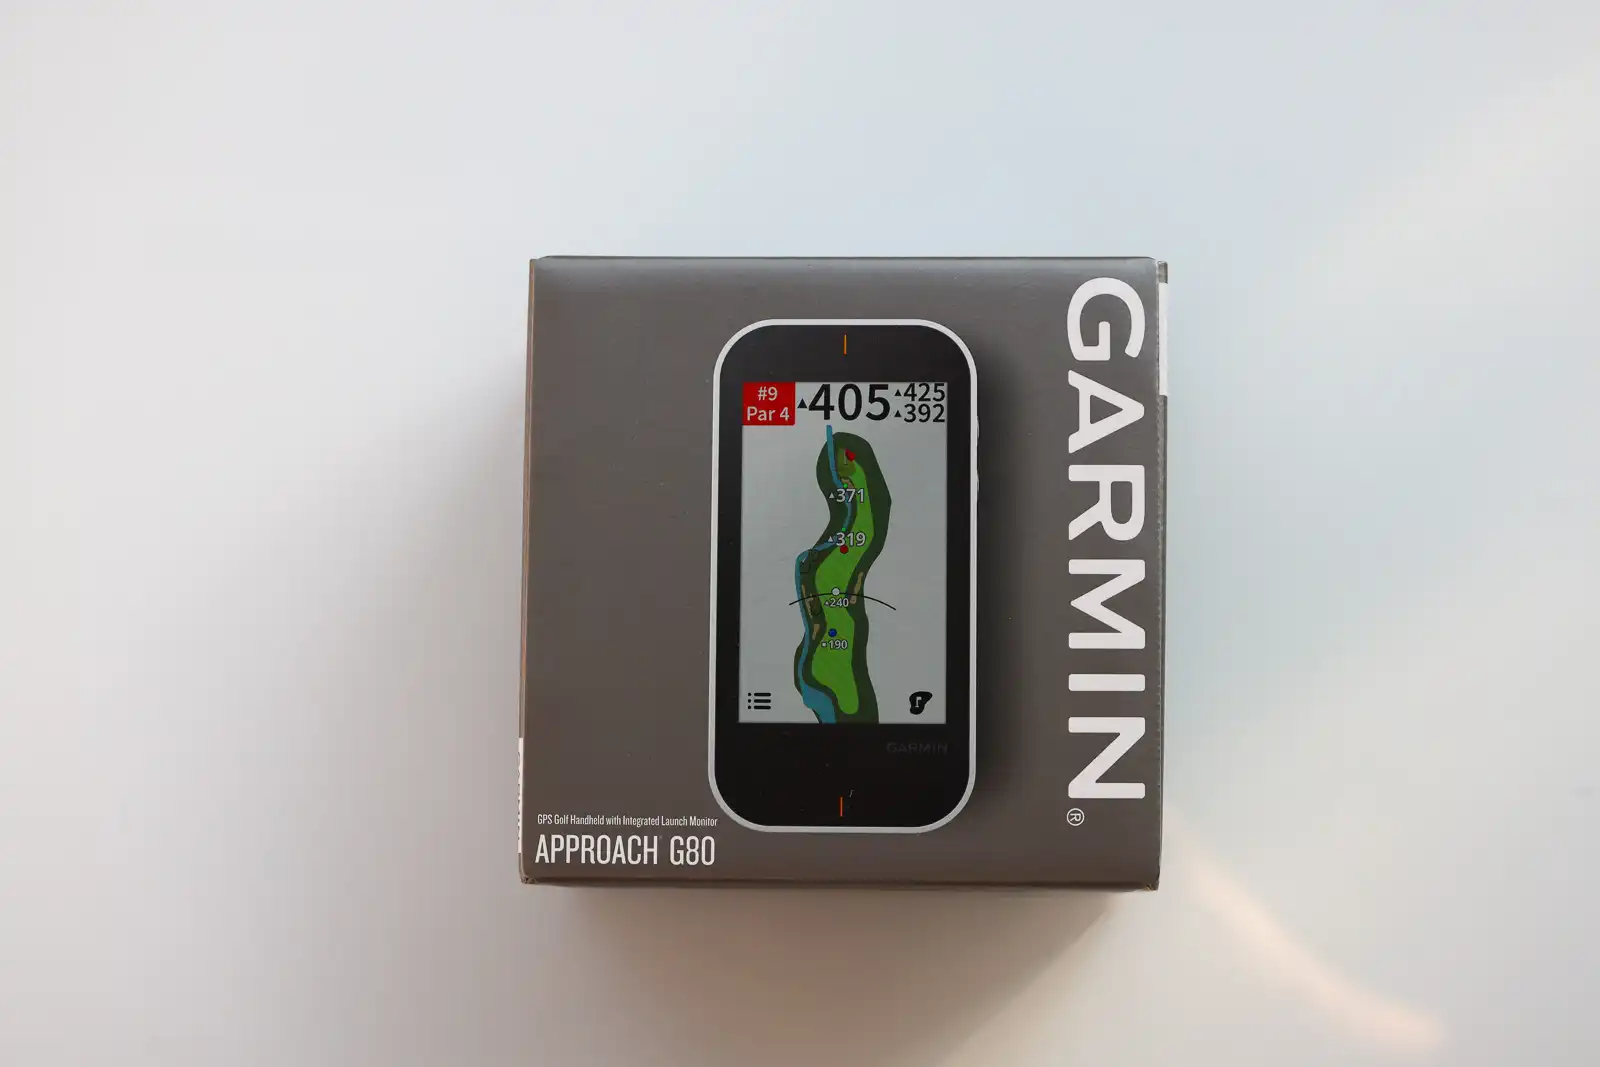 Garmin Approach G80 GPS and Launch Monitor